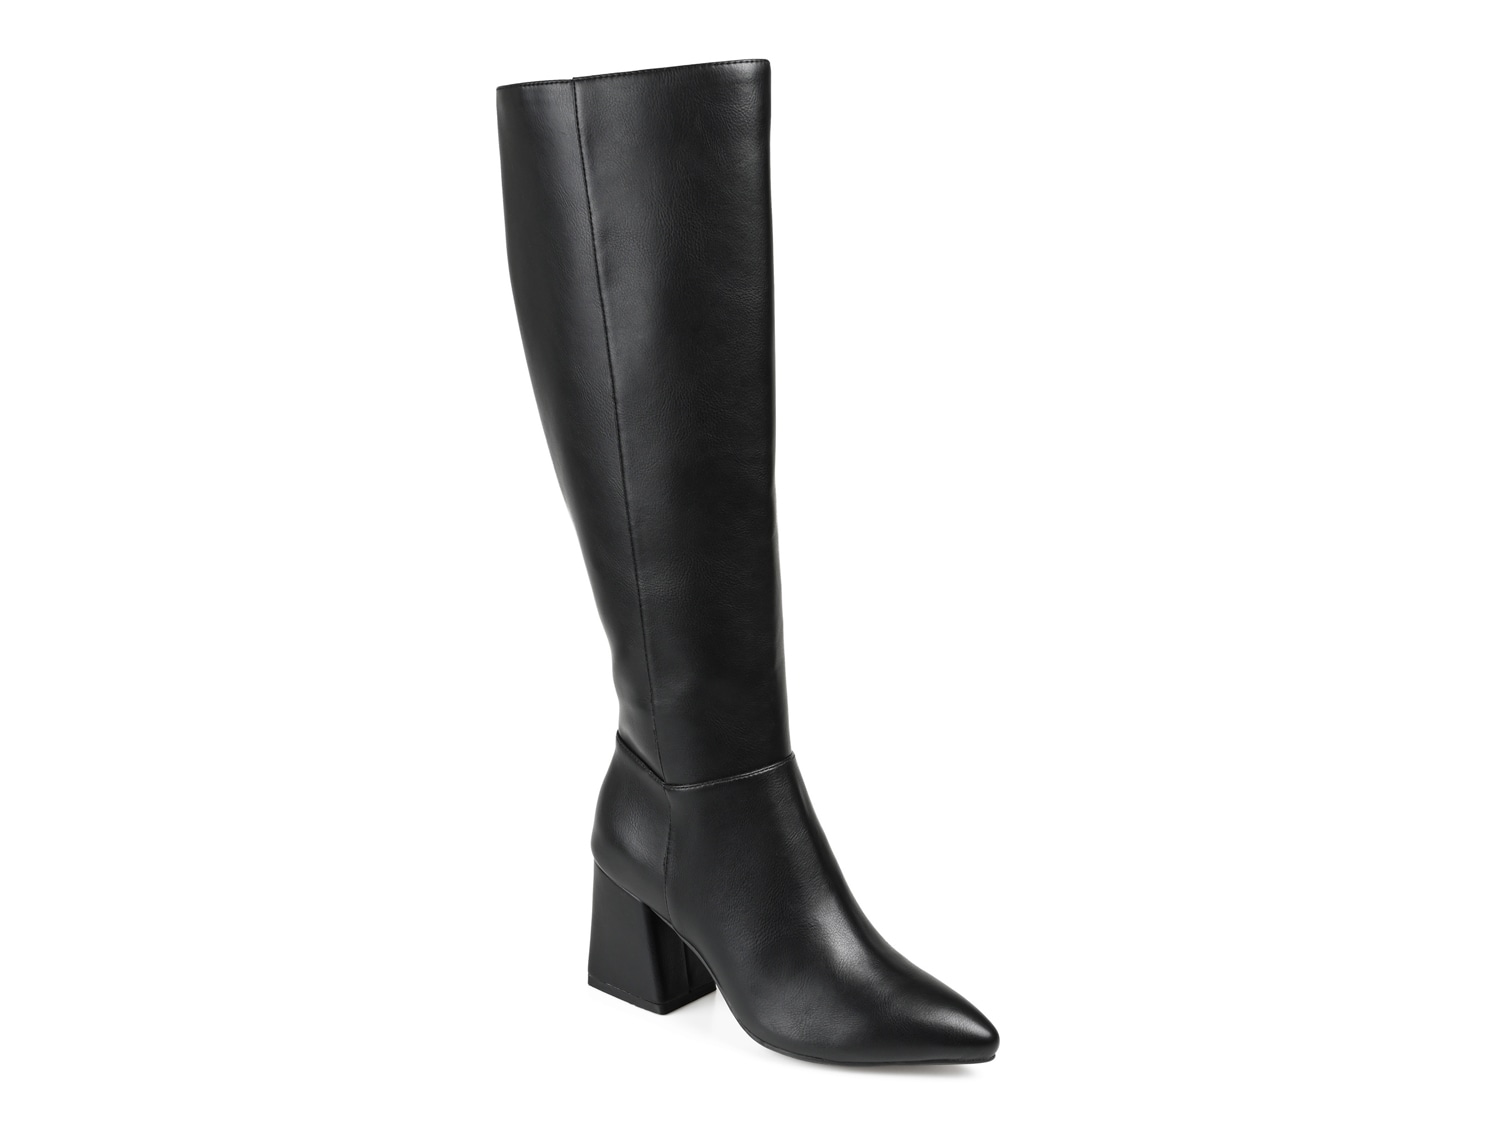 Journee Collection Landree Boot - Free Shipping | DSW